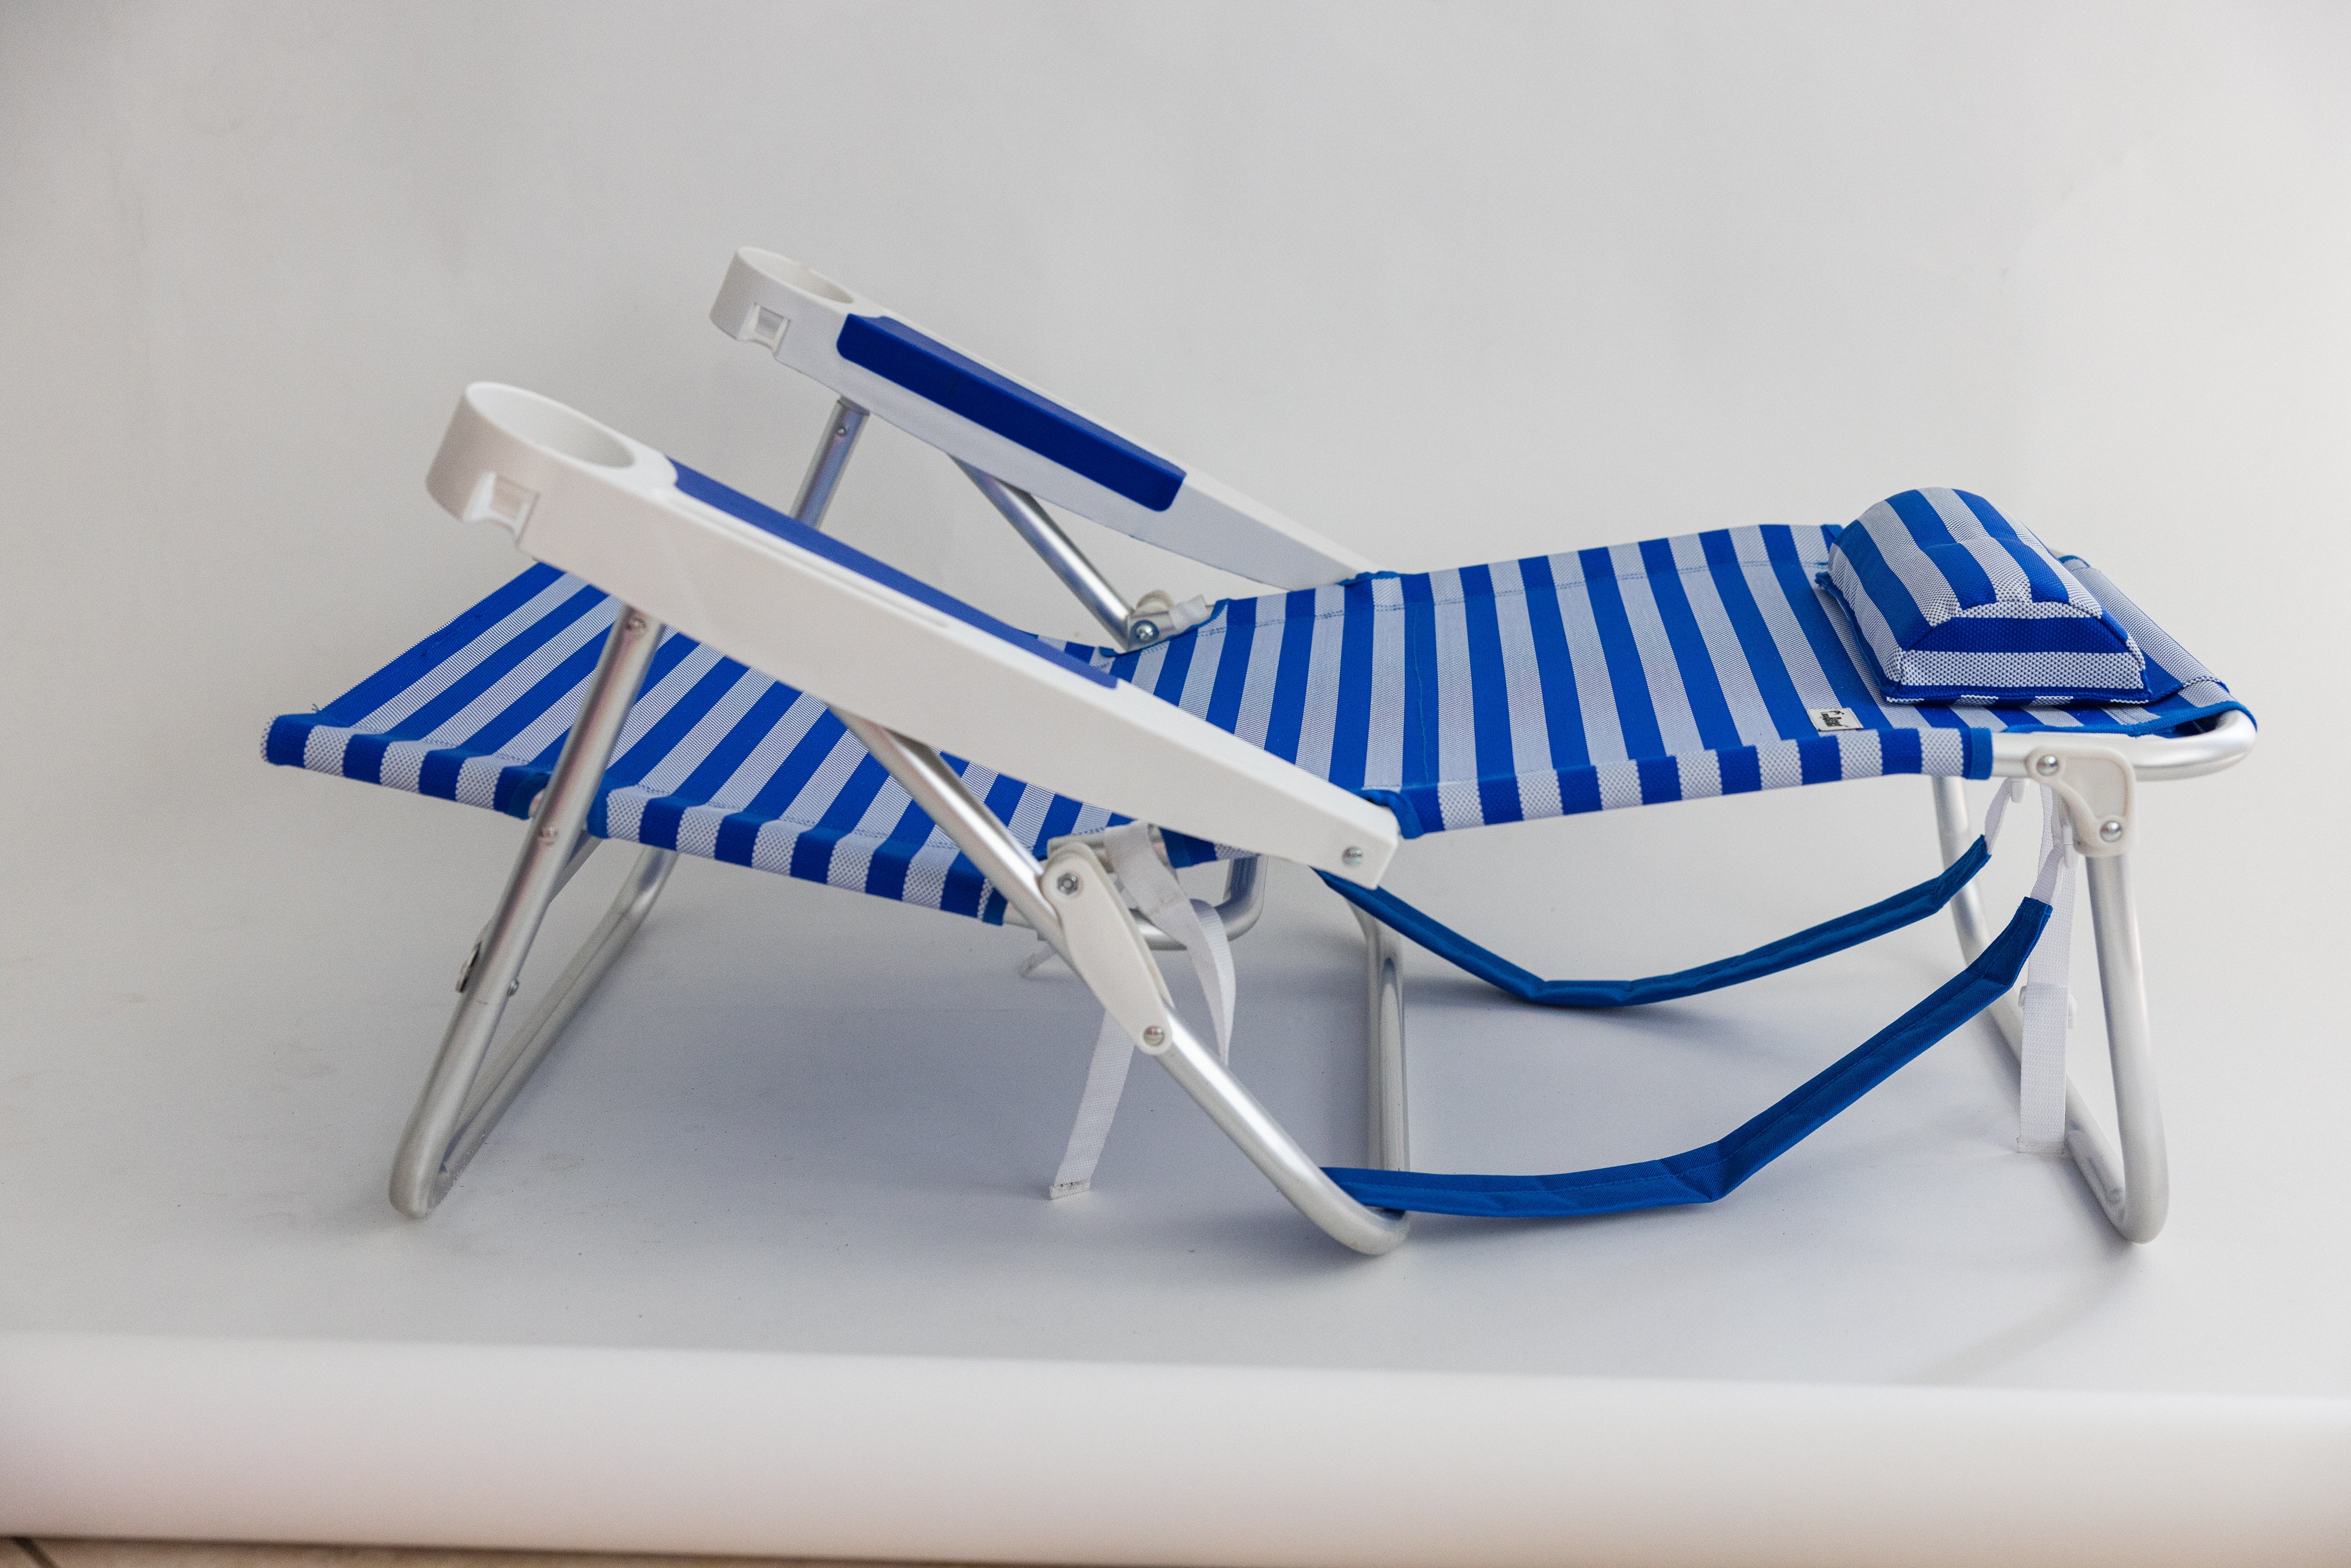 Set of Two (2) Lay Flat Backpack Beach Chairs